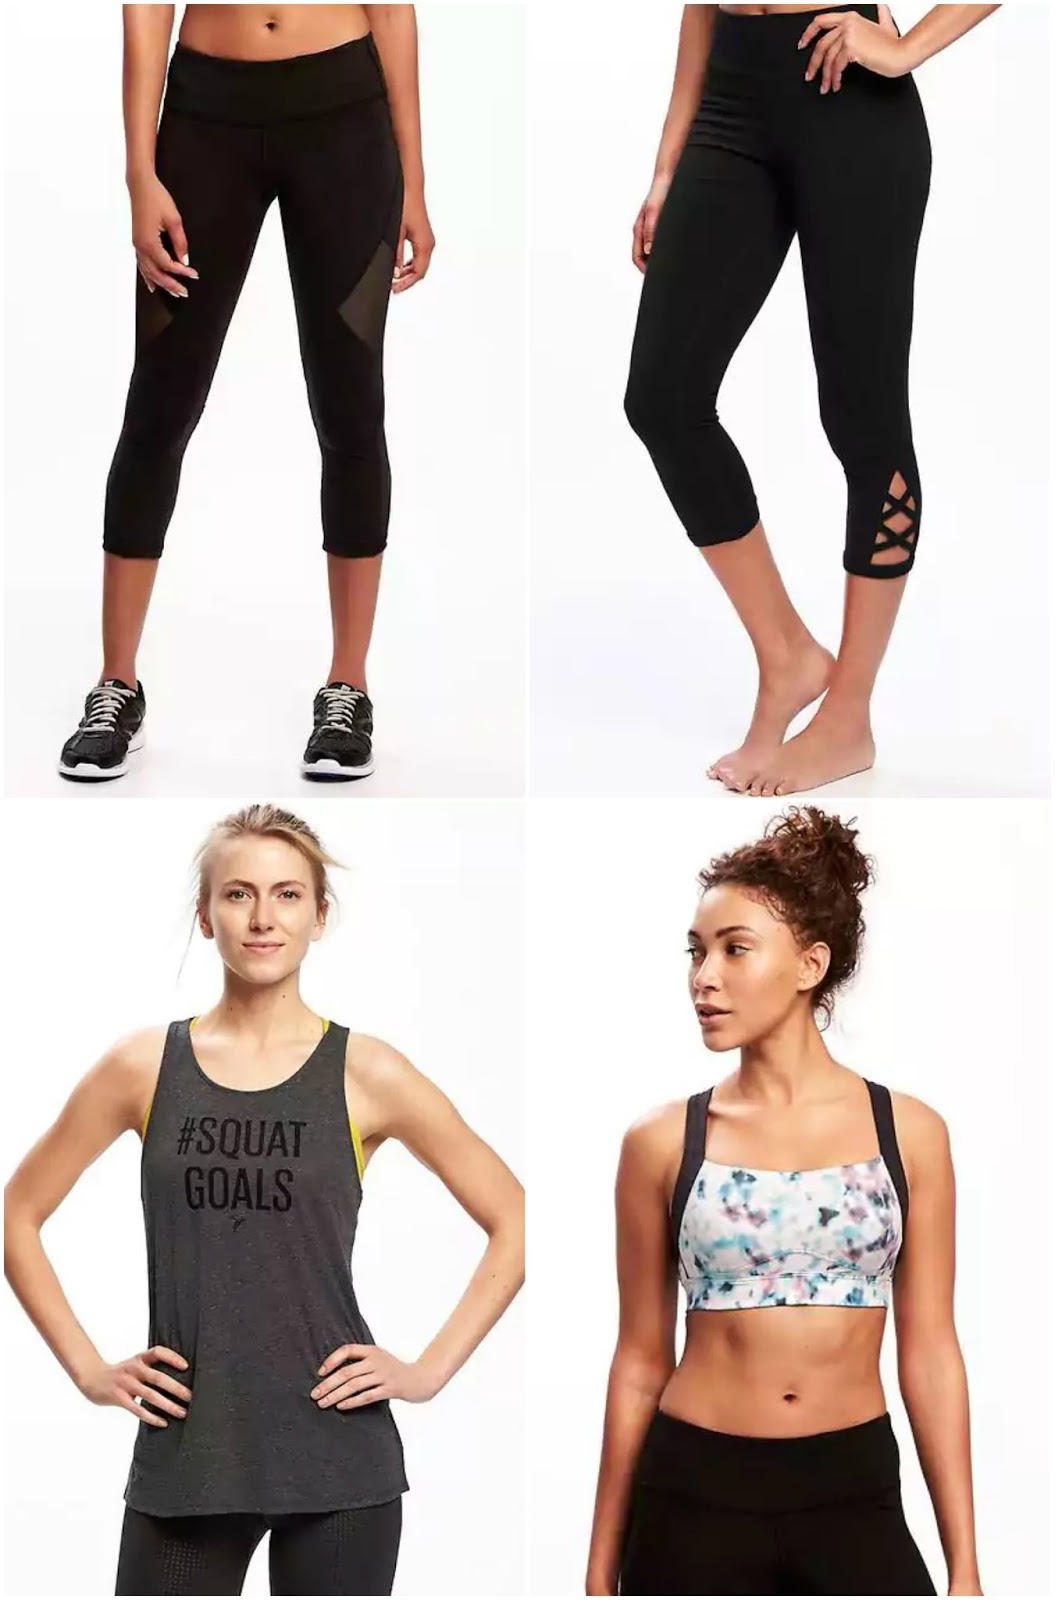 Franish: a quick review of Old Navy active wear items